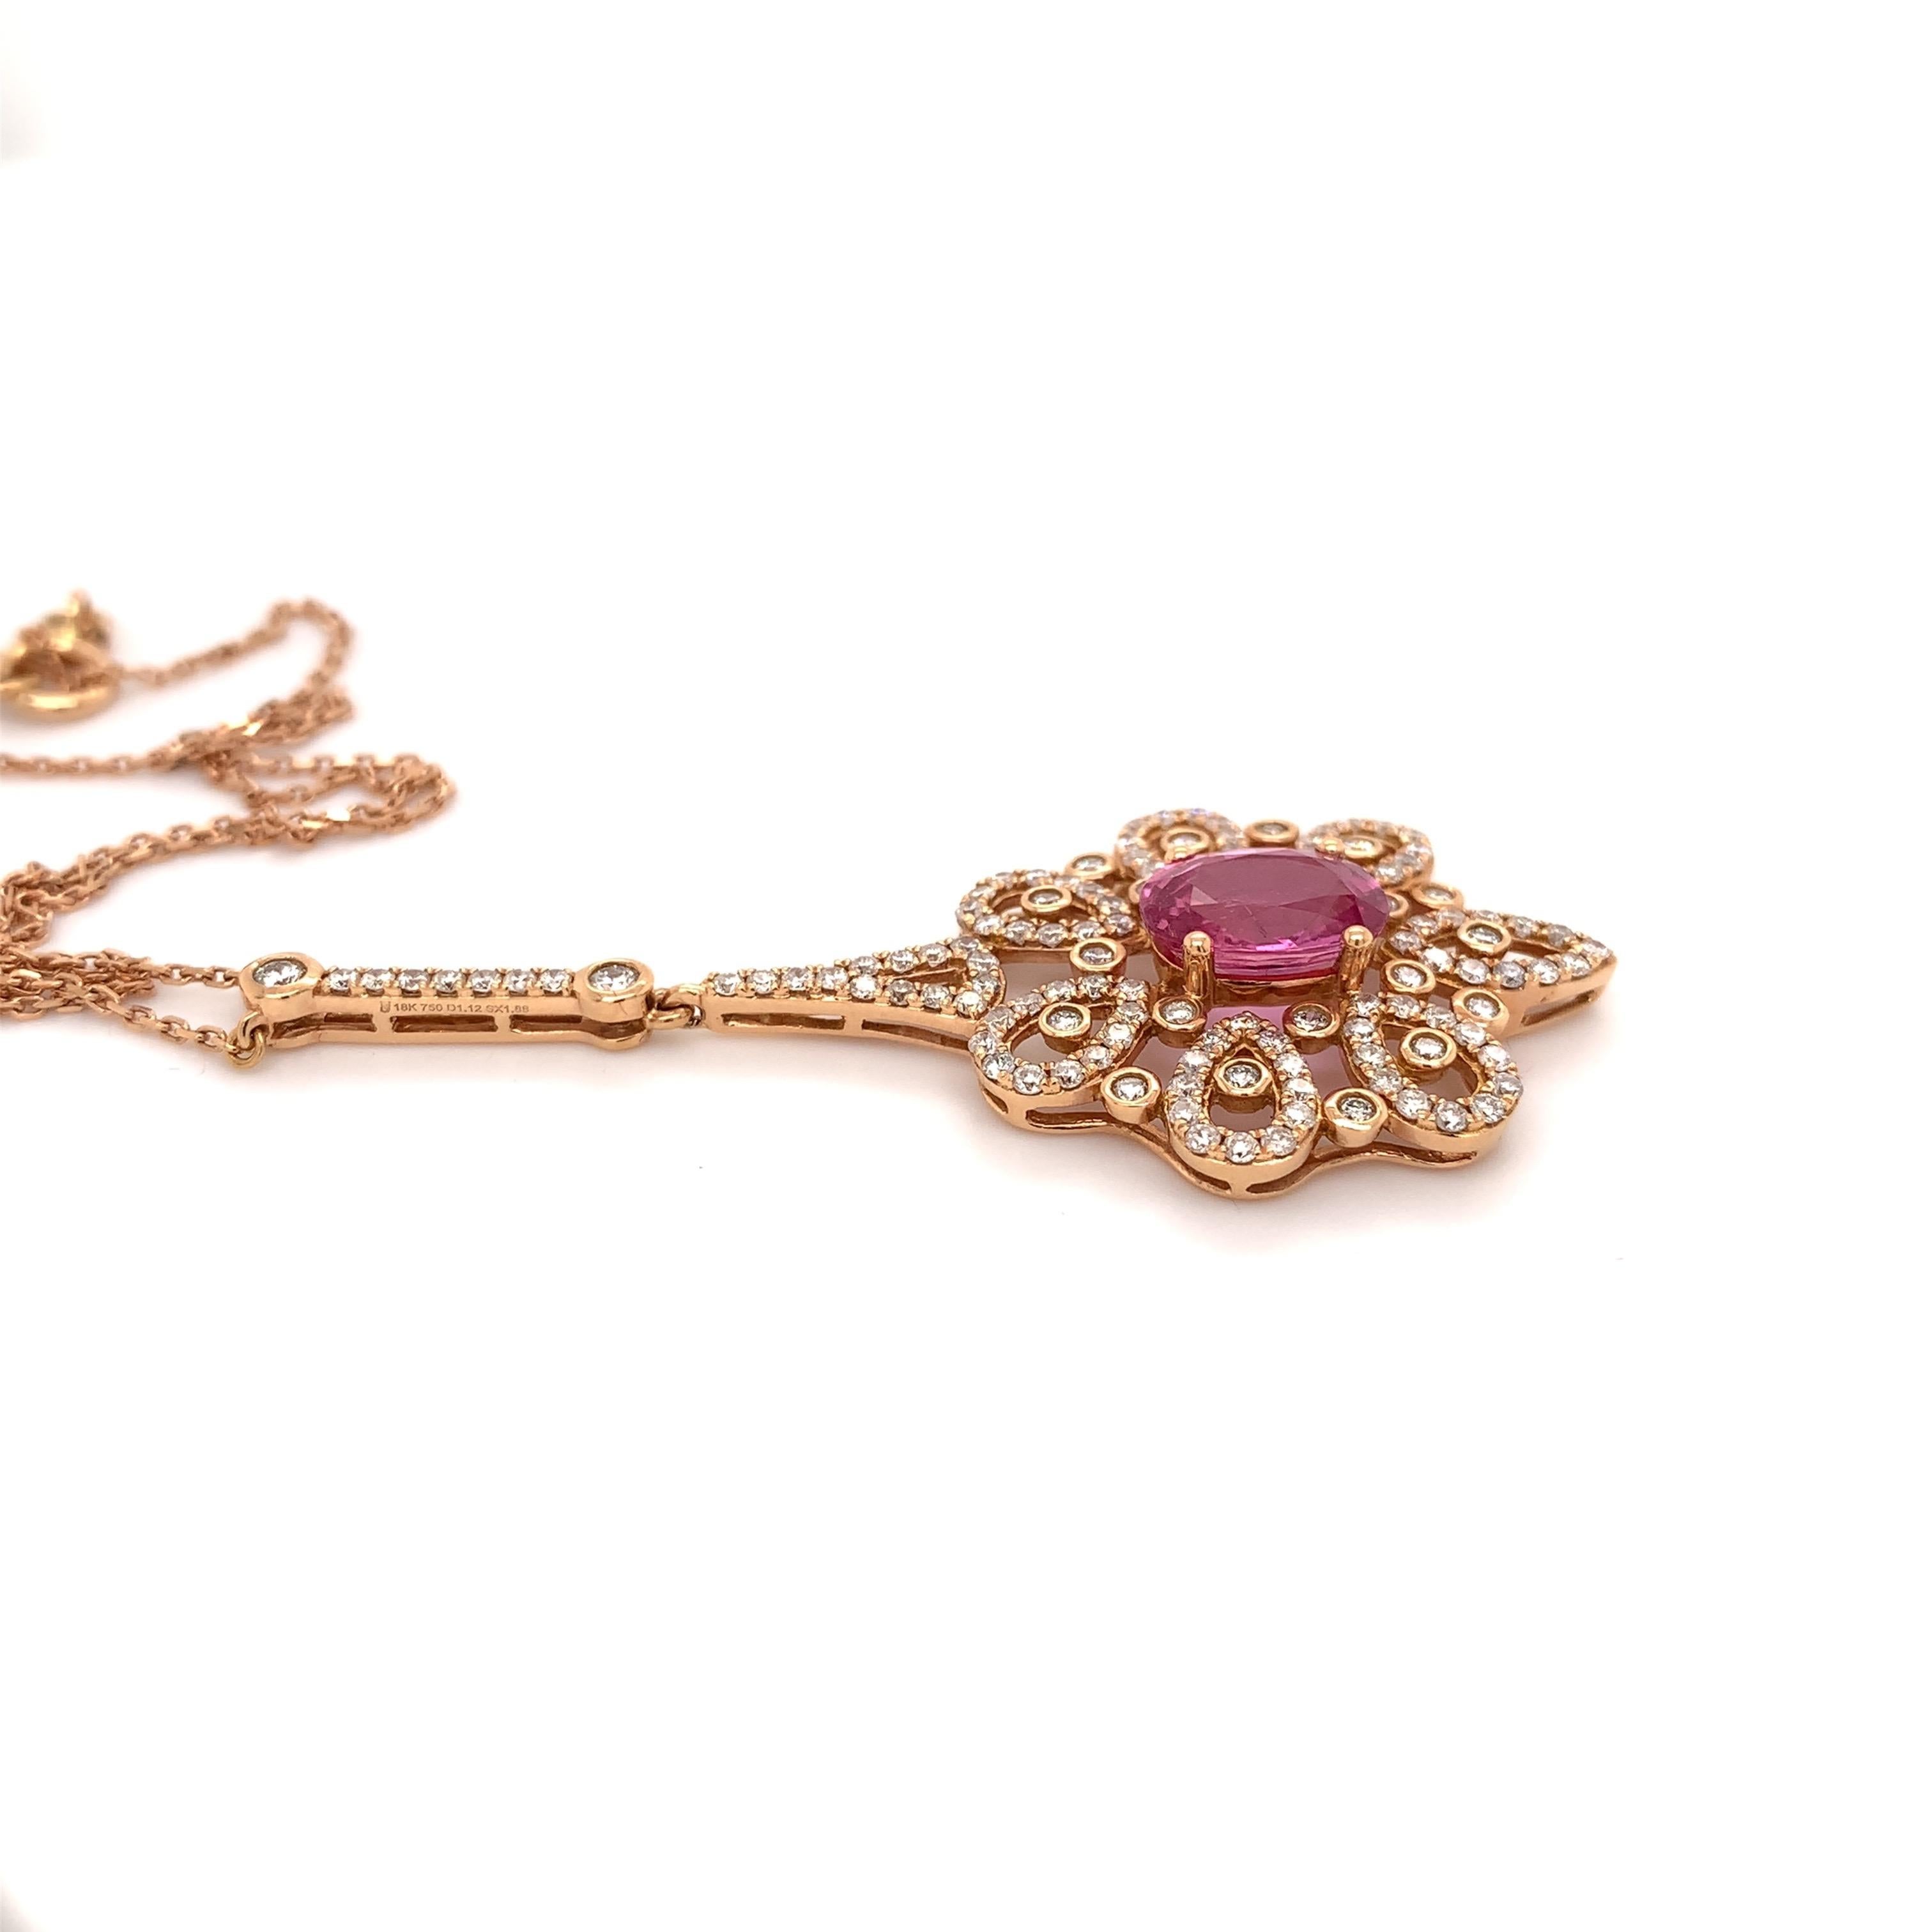 Magnificent pink sapphire diamond pendant necklace. High brilliance, oval faceted, intense pink 1.88 carats natural sapphire mounted in high profile open basket, accented with round brilliant cut diamonds. Handcrafted elegant design set in high